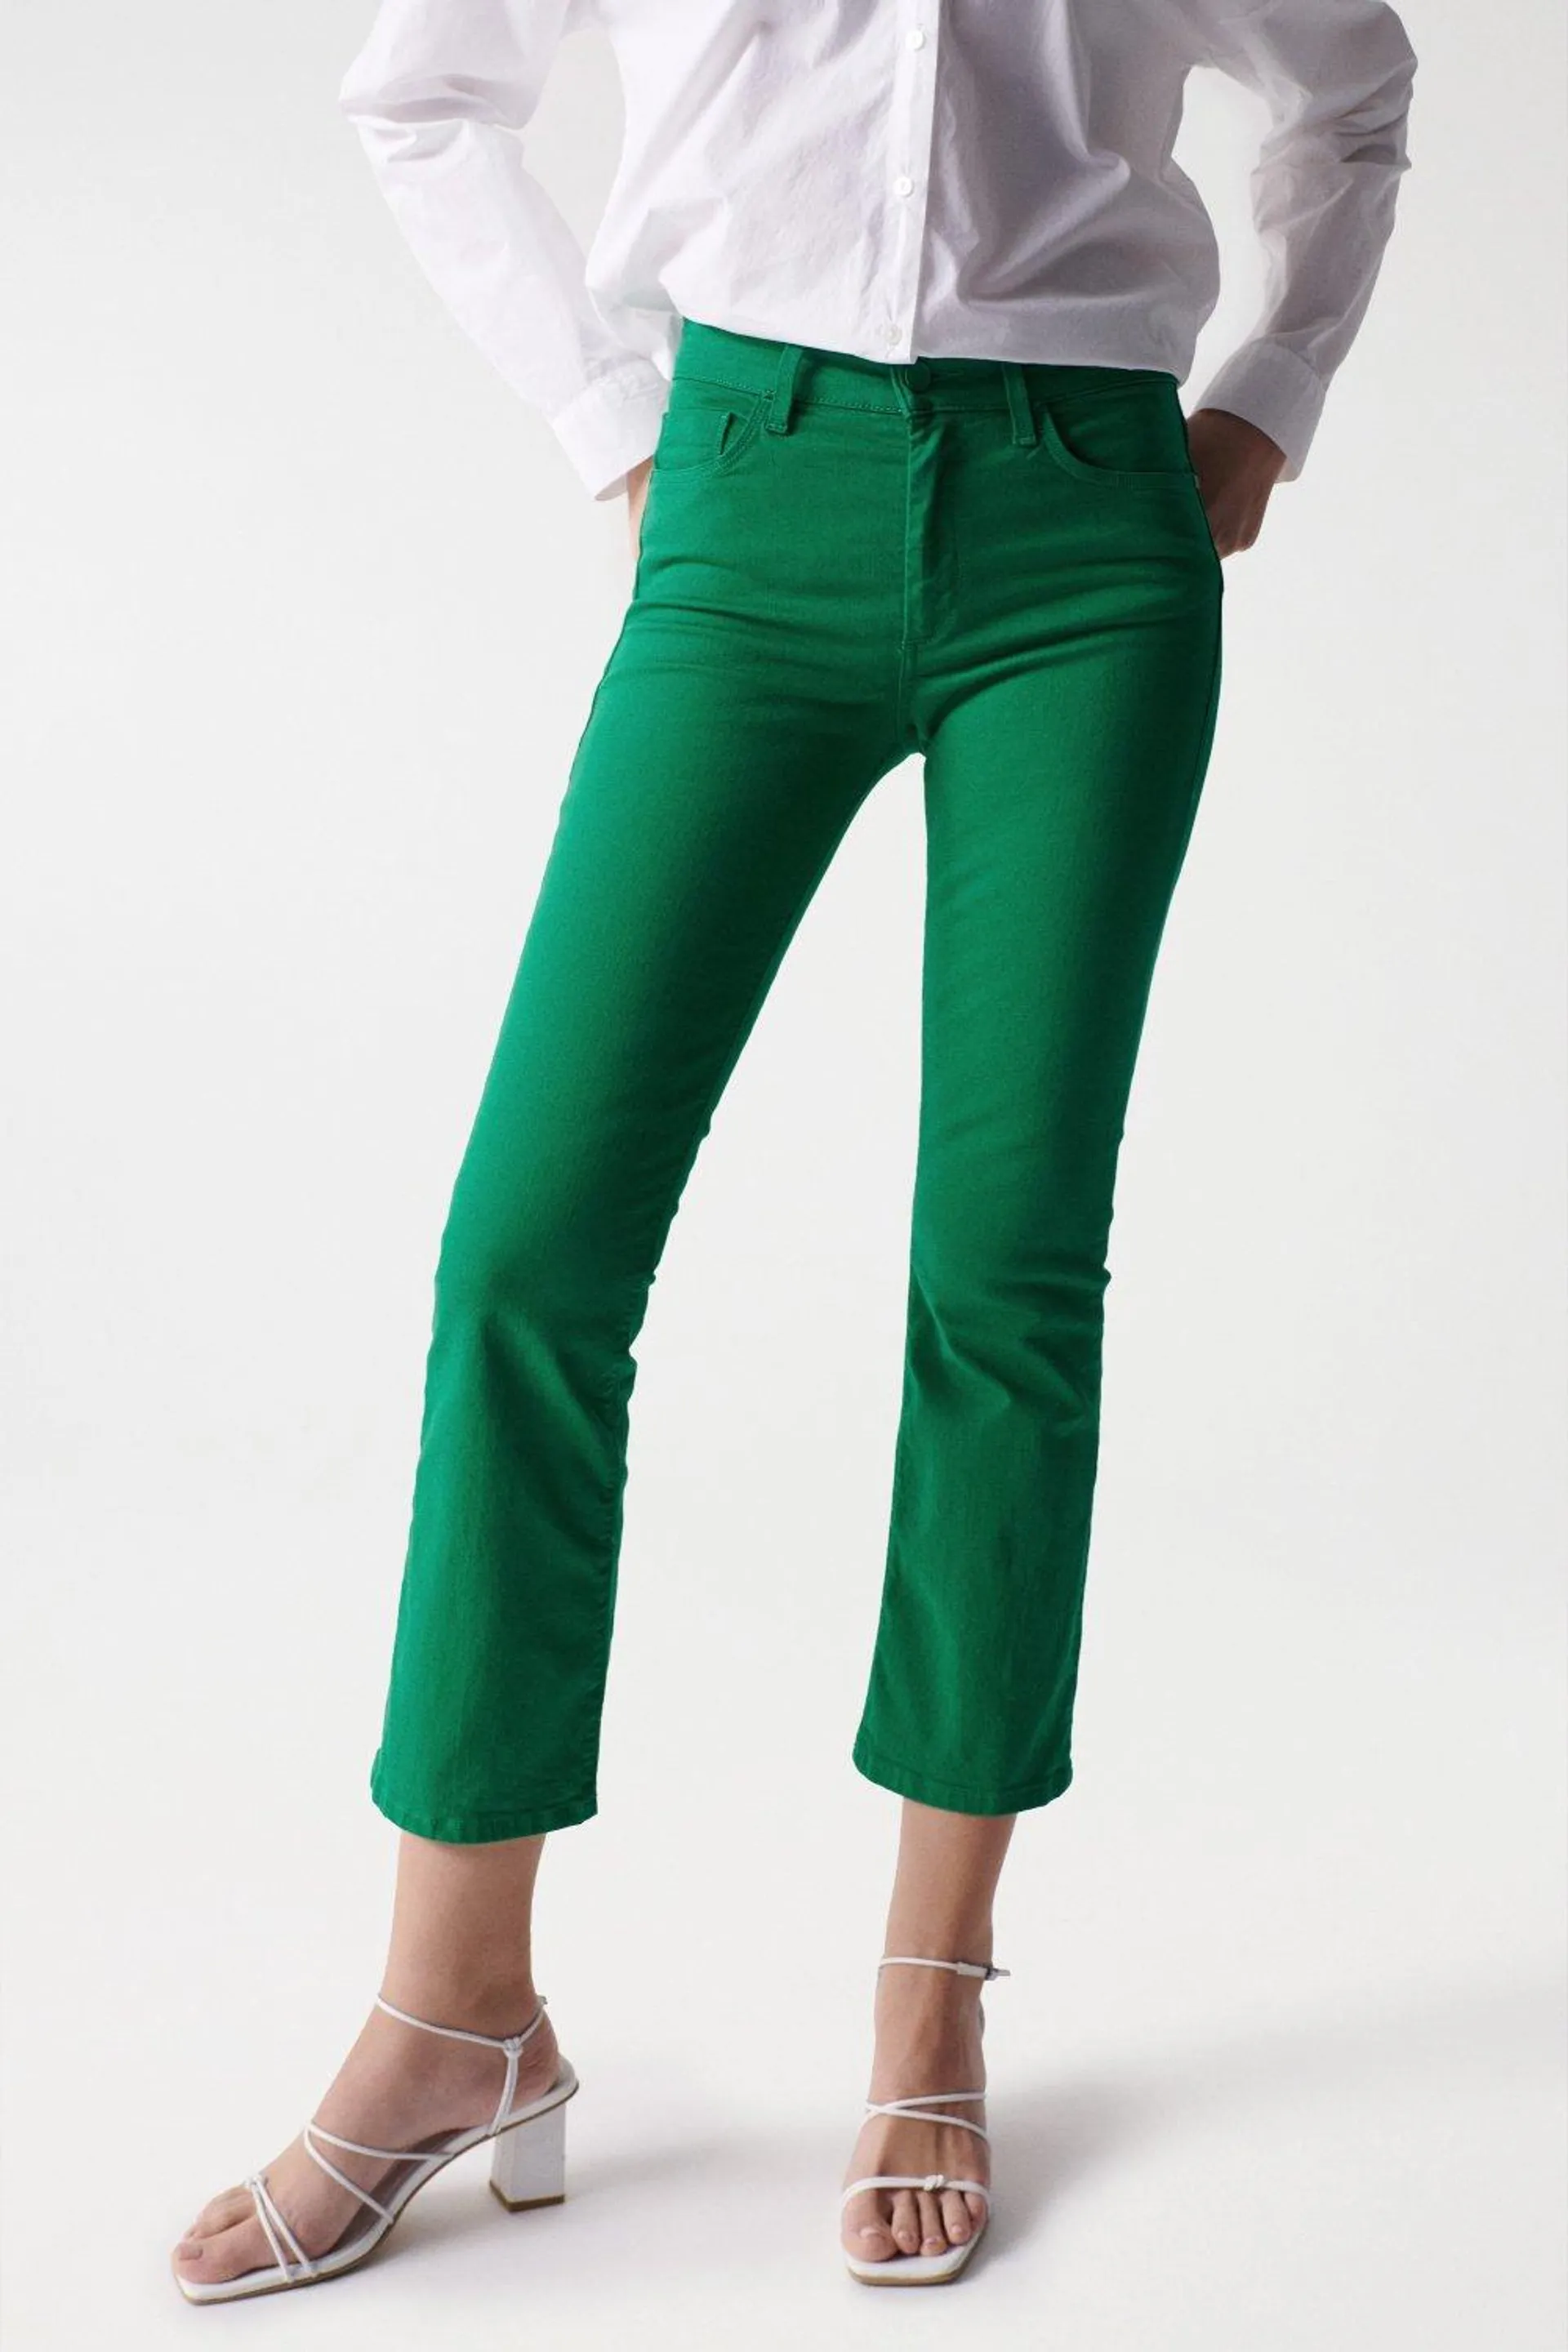 JEANS DESTINY PUSH UP VERDE CROPPED FLARE